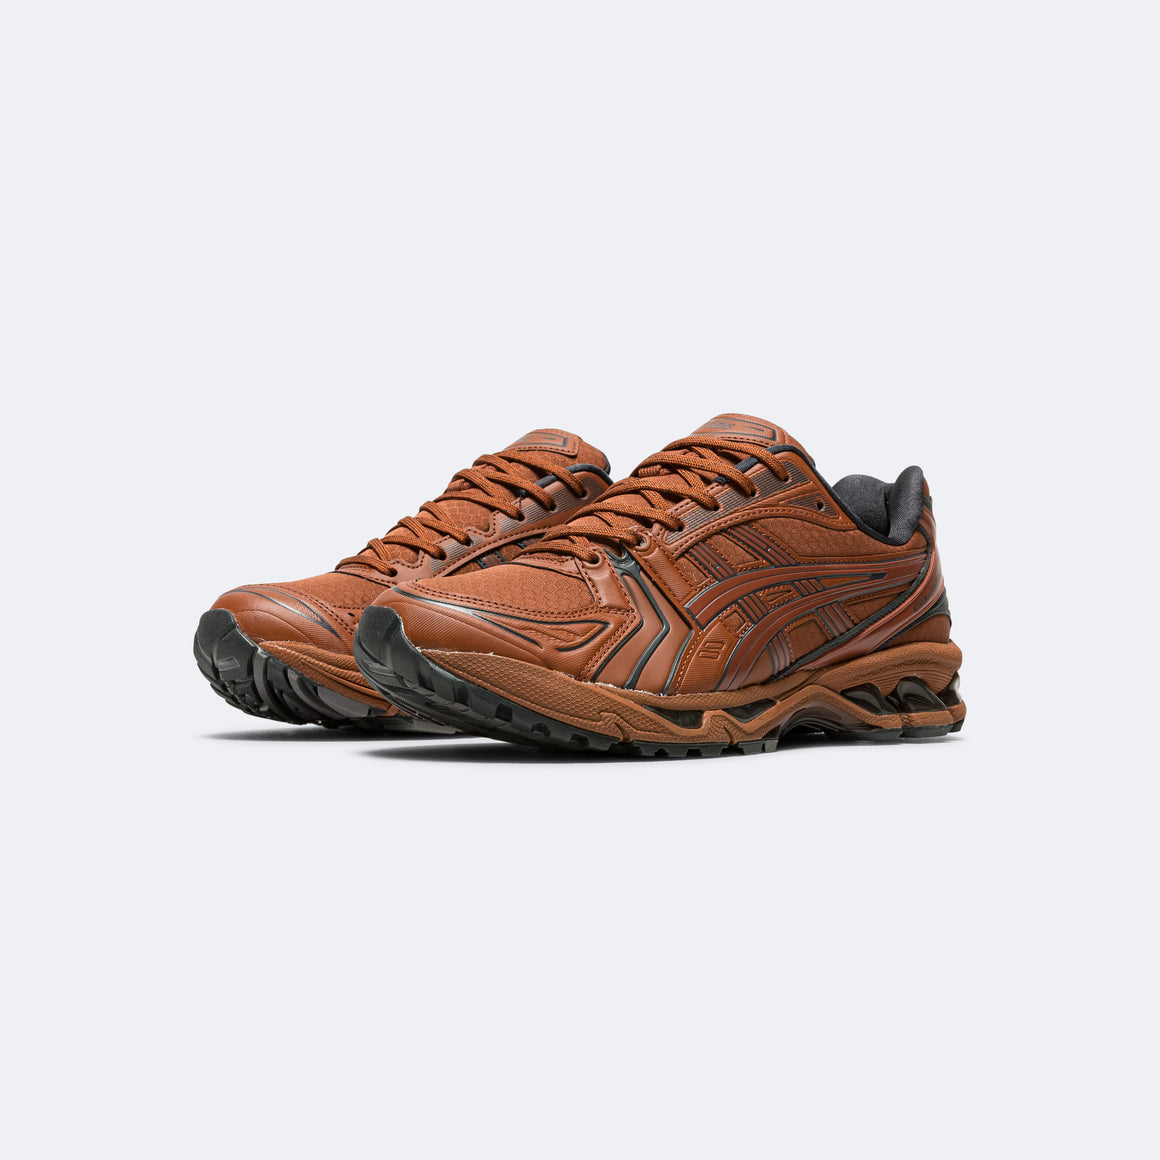 Asics - GEL-Kayano 14 Earthenware - Rusty Brown/Graphite Grey - UP THERE